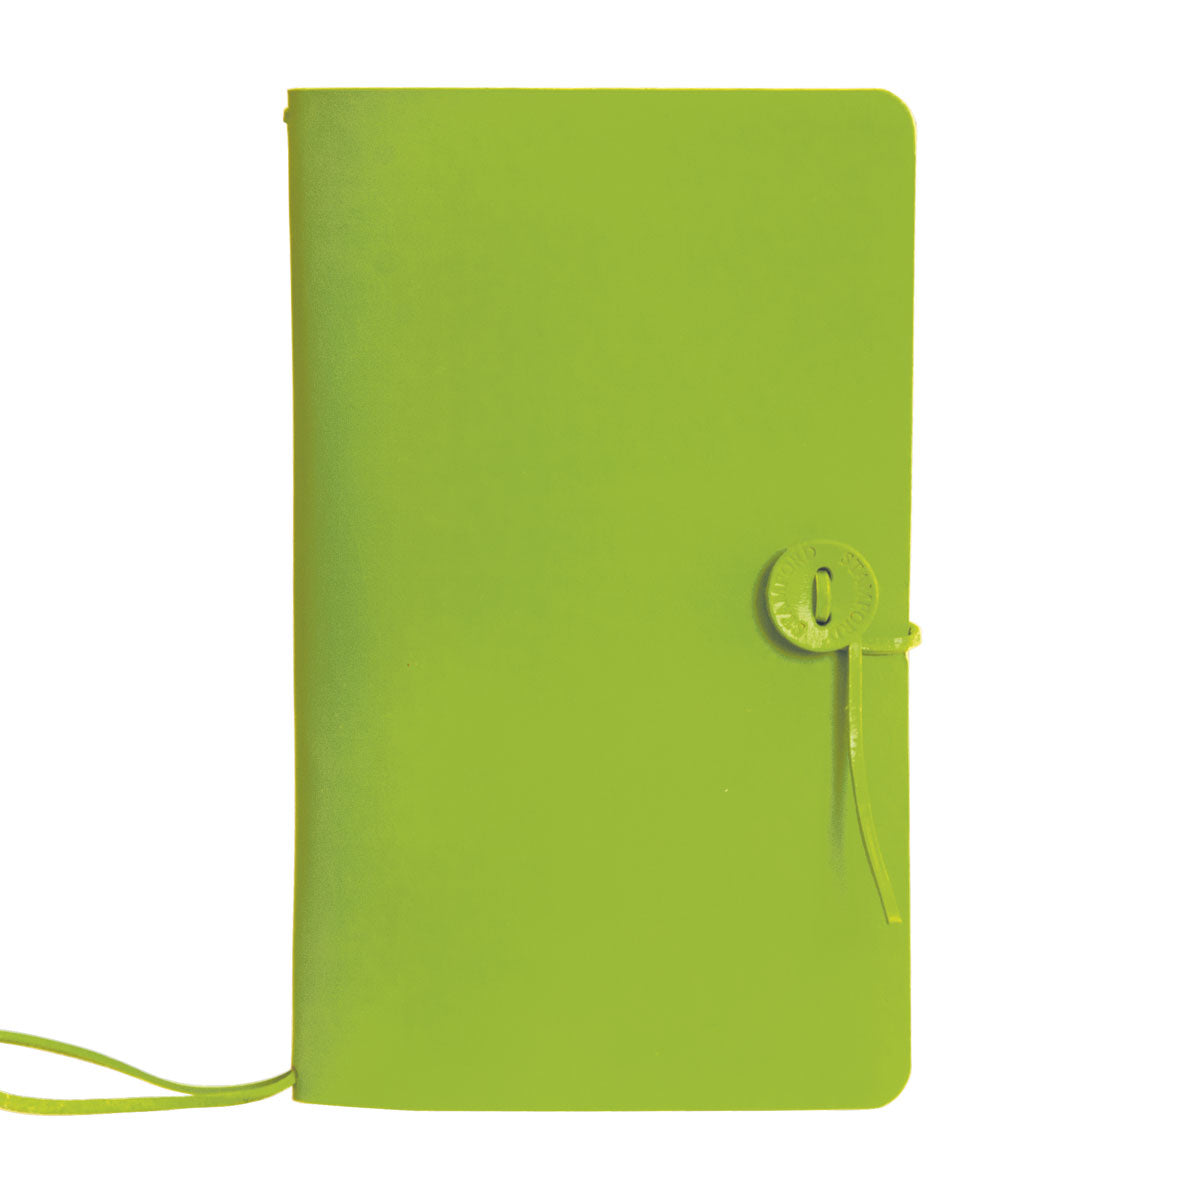 Green leather refillable travellers journal